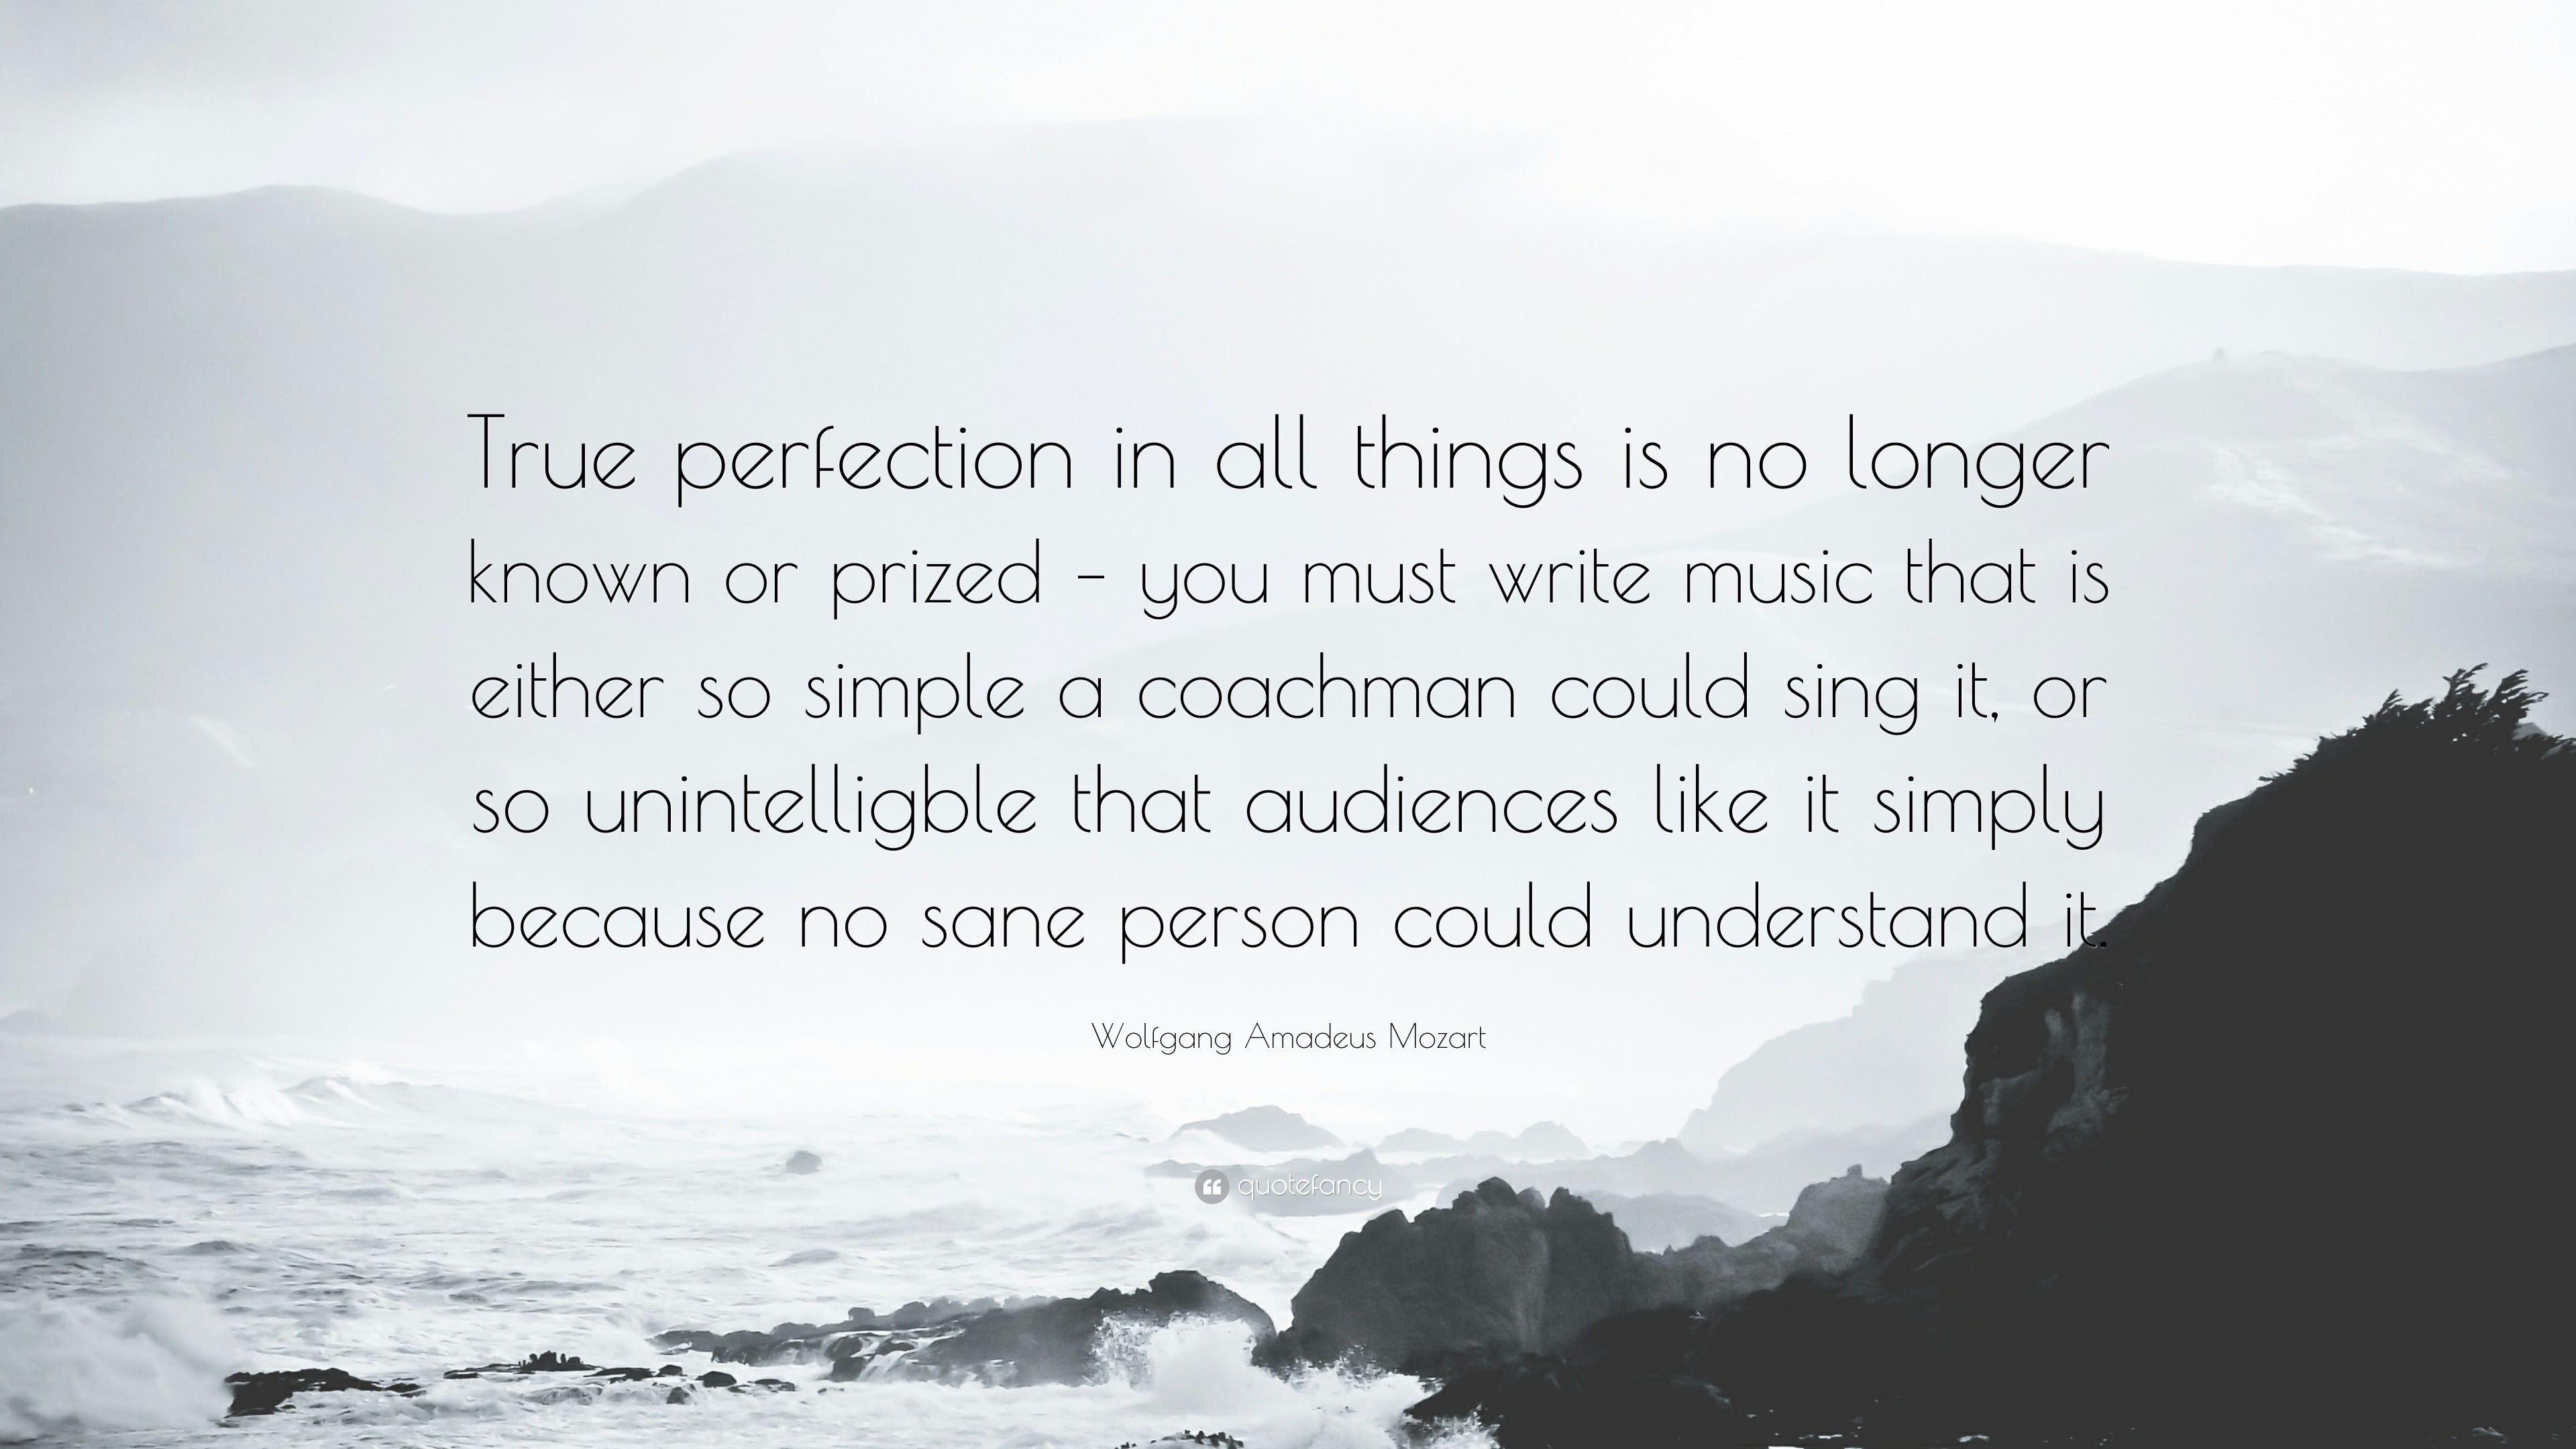 Wolfgang Amadeus Mozart Quote: “True perfection in all things is no ...